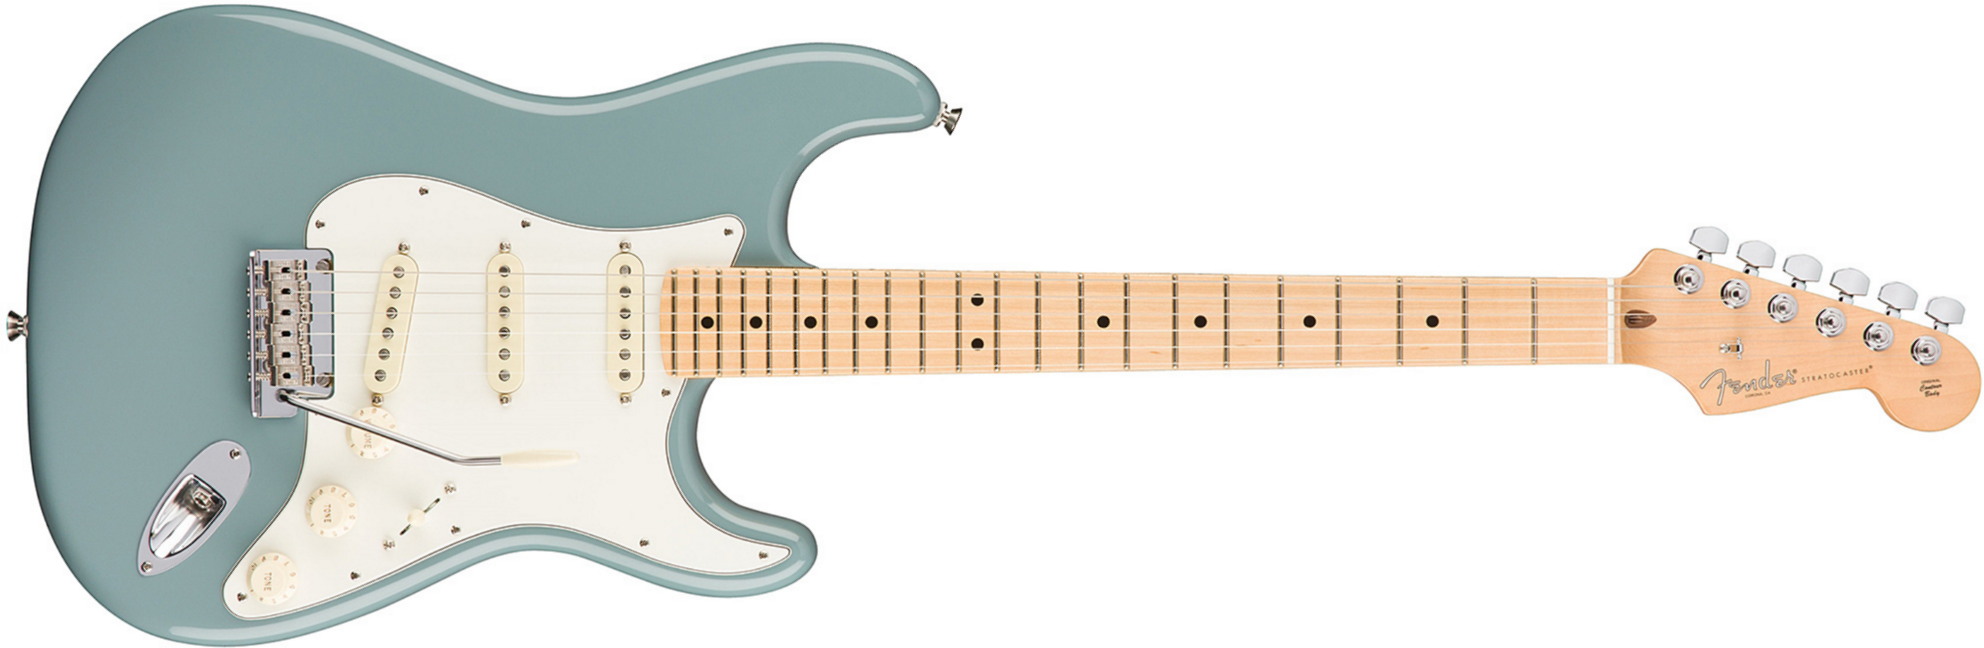 Fender Strat American Professional 2017 3s Usa Mn - Sonic Grey - Str shape electric guitar - Main picture